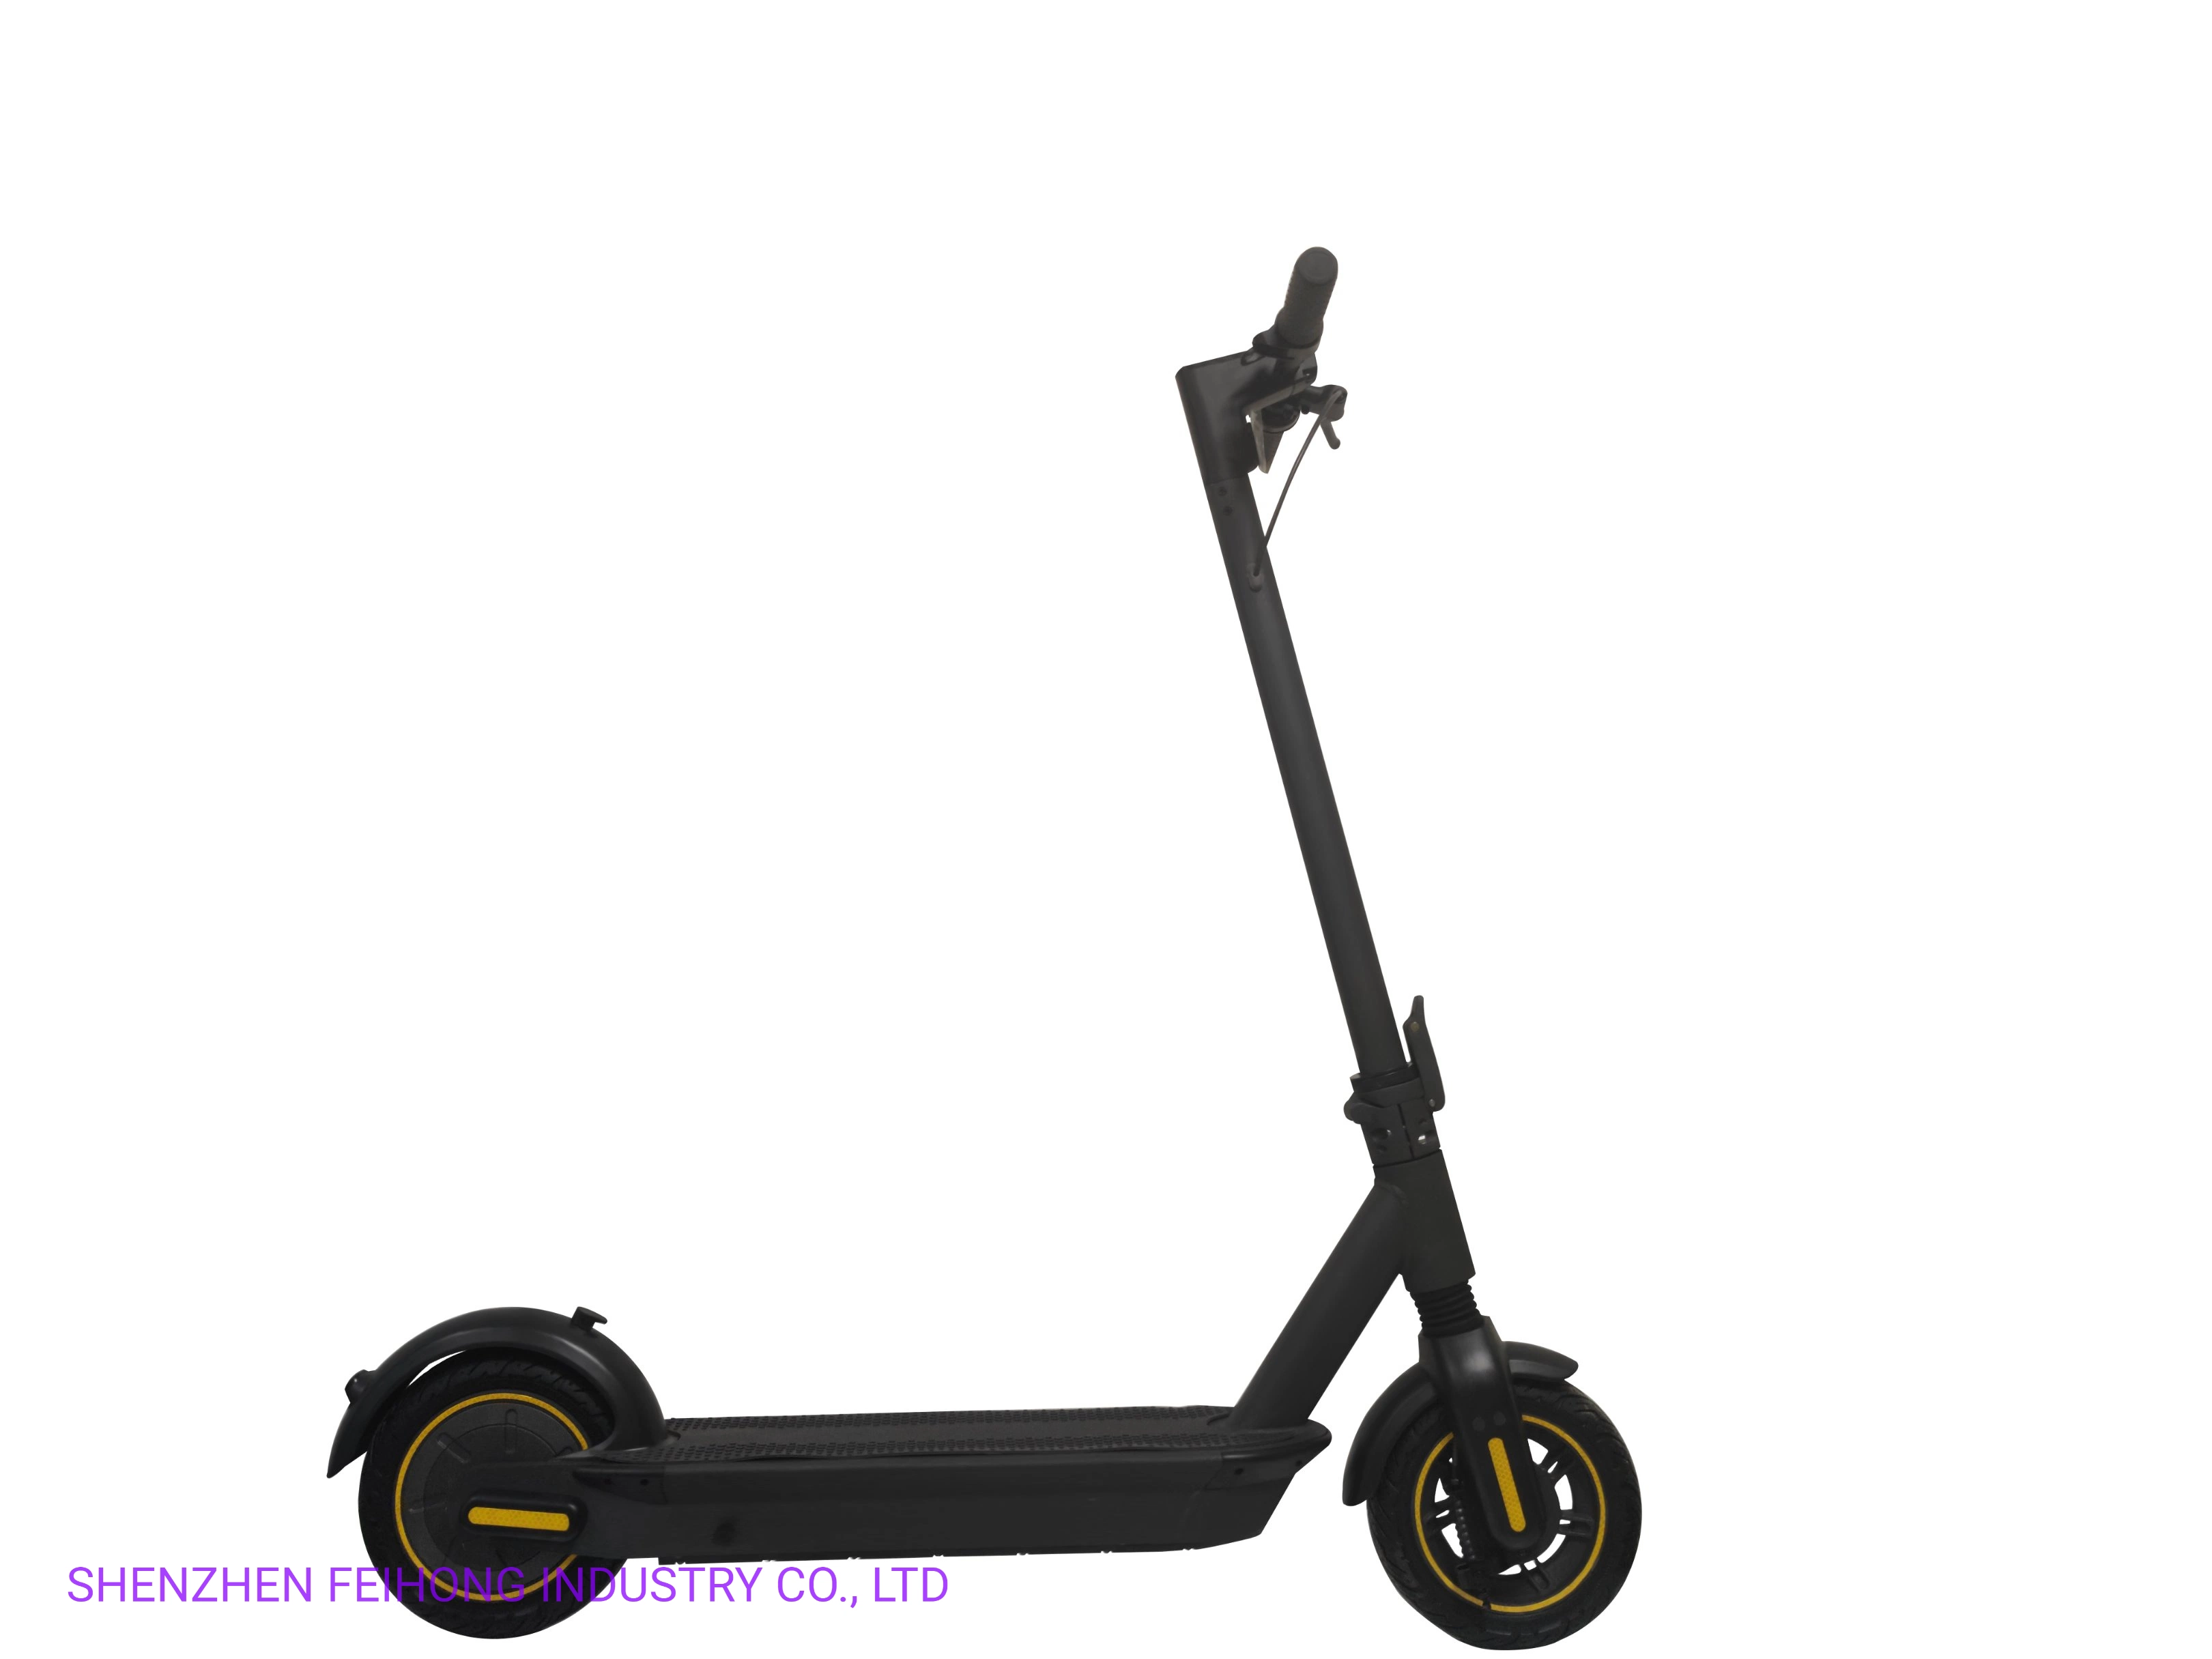 10 Inch Motorcycle Electric Scooter Bicycle Electric Bike Electric Motorcycle Scooter Motor Scooter Battery 36V 15ah 500W Motor Stepper Scooter Dirt Bike